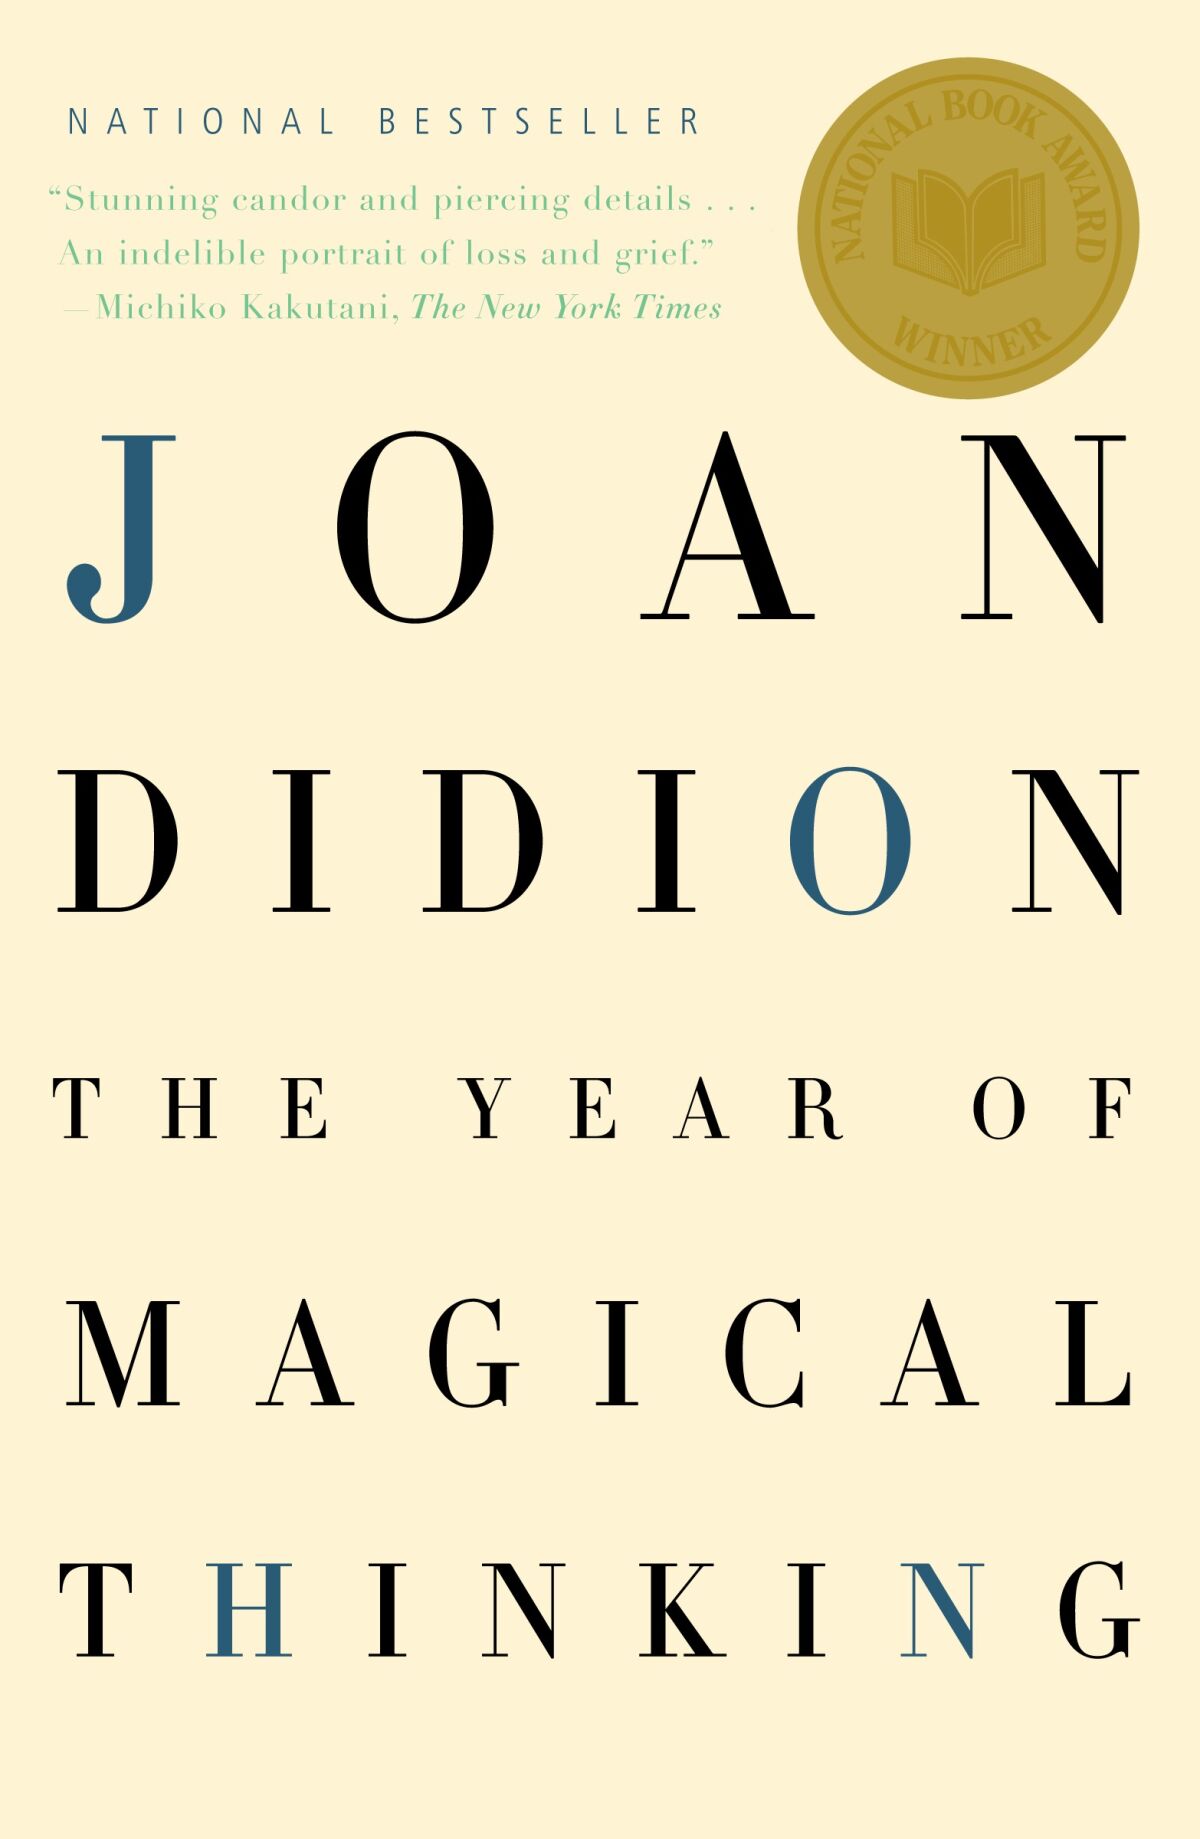 "The Year of Magical Thinking," by Joan Didion